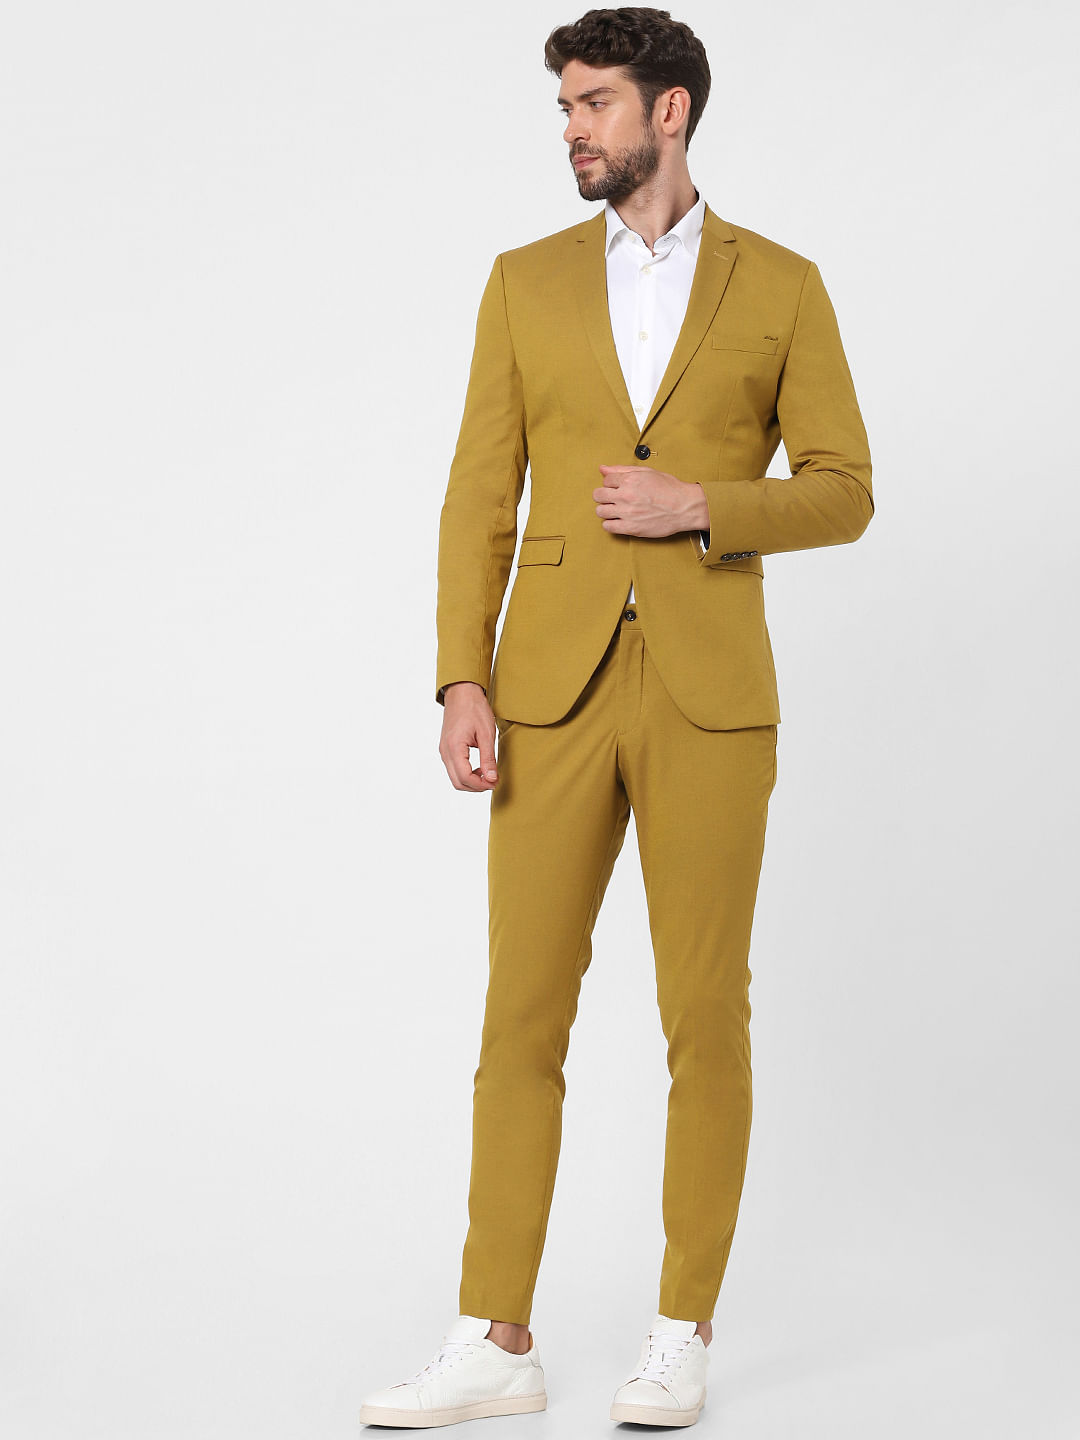 Discover more than 78 mustard colour mens suit